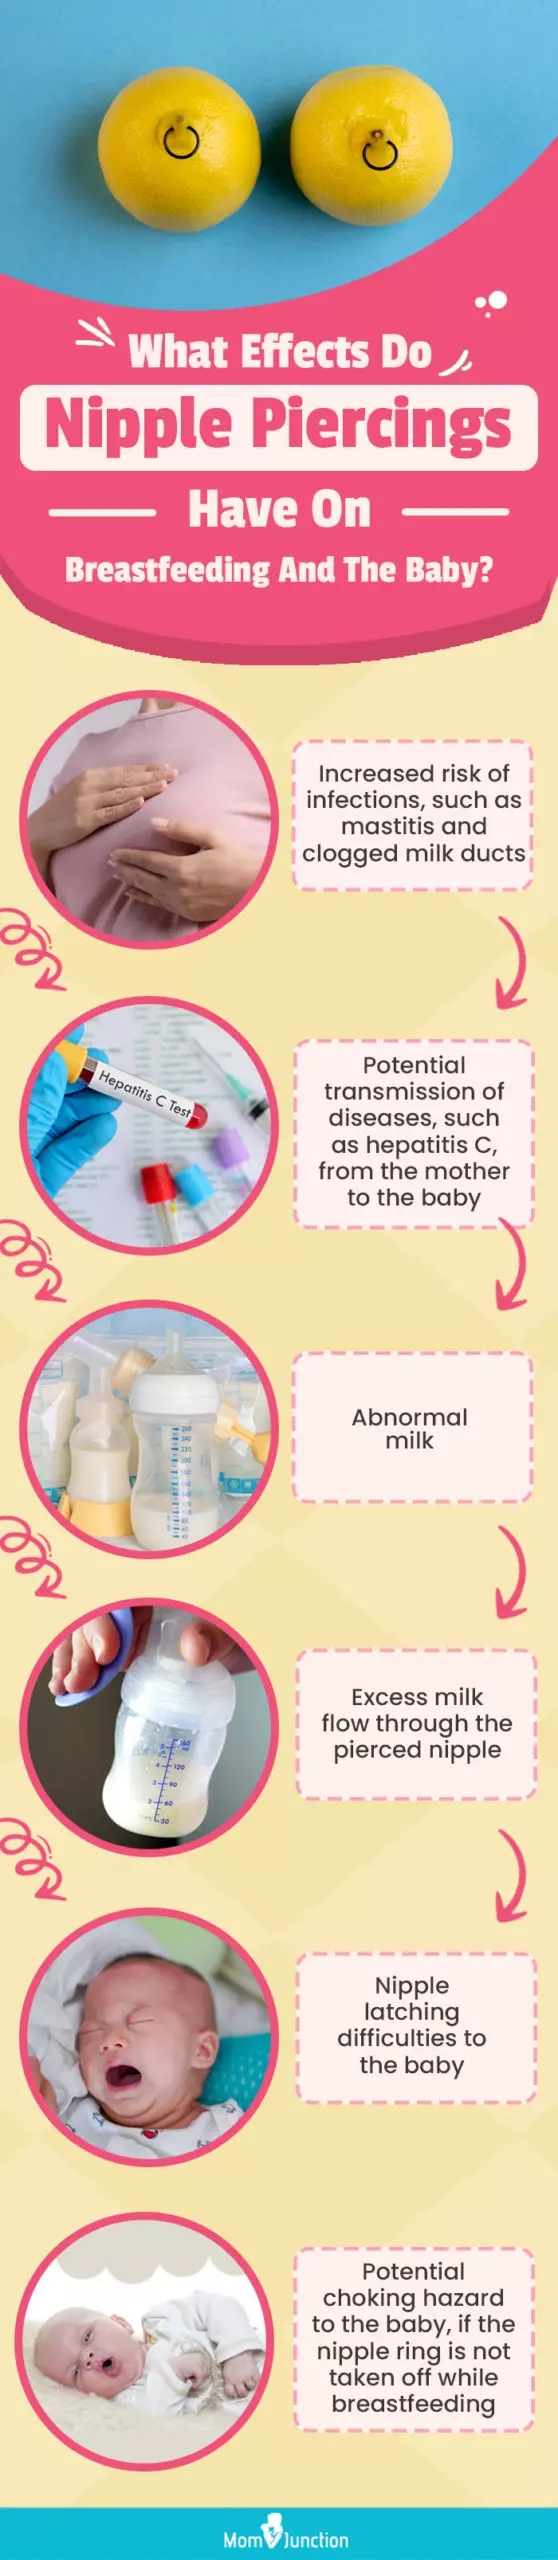 what effects do nipple piercings have on breastfeeding and the baby (infographic)